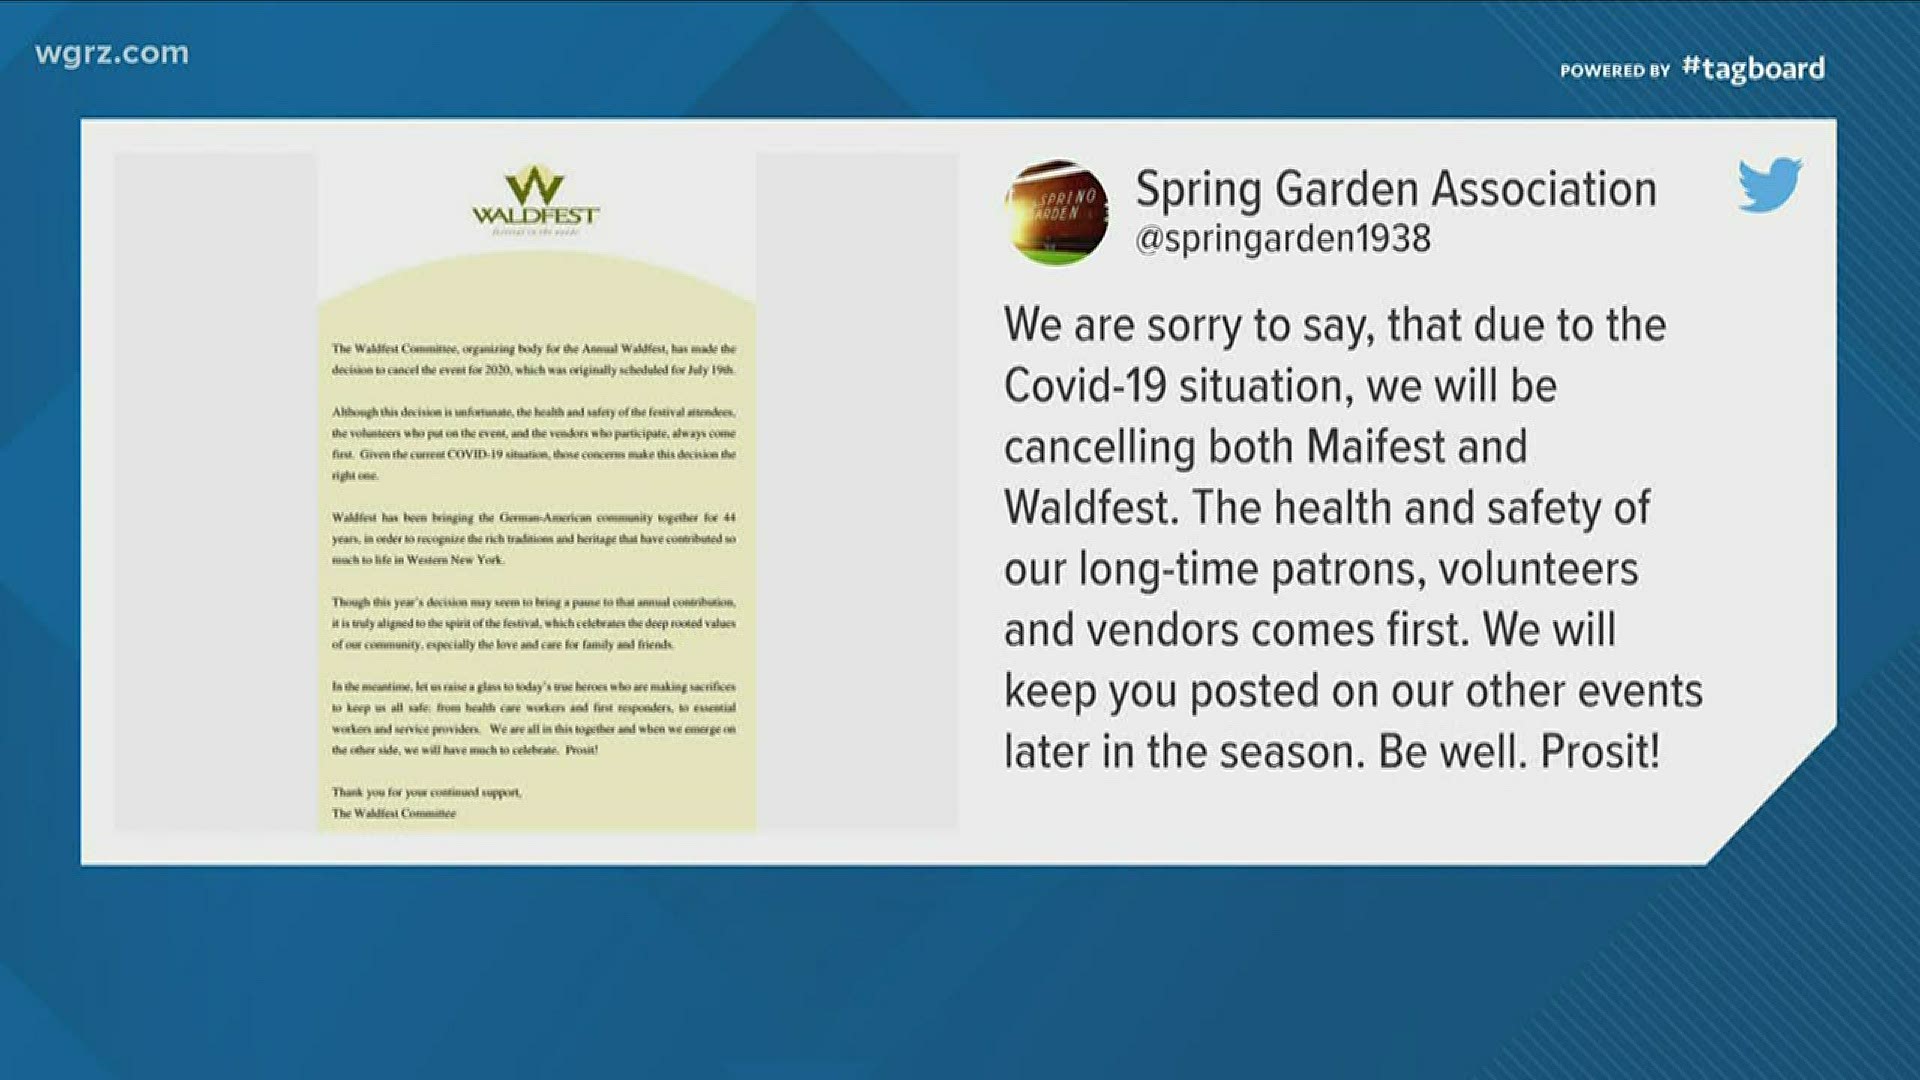 The "Spring Garden Association" announced today that it's canceling the "Waldfest German festival" that was scheduled for mid-July in East Aurora.